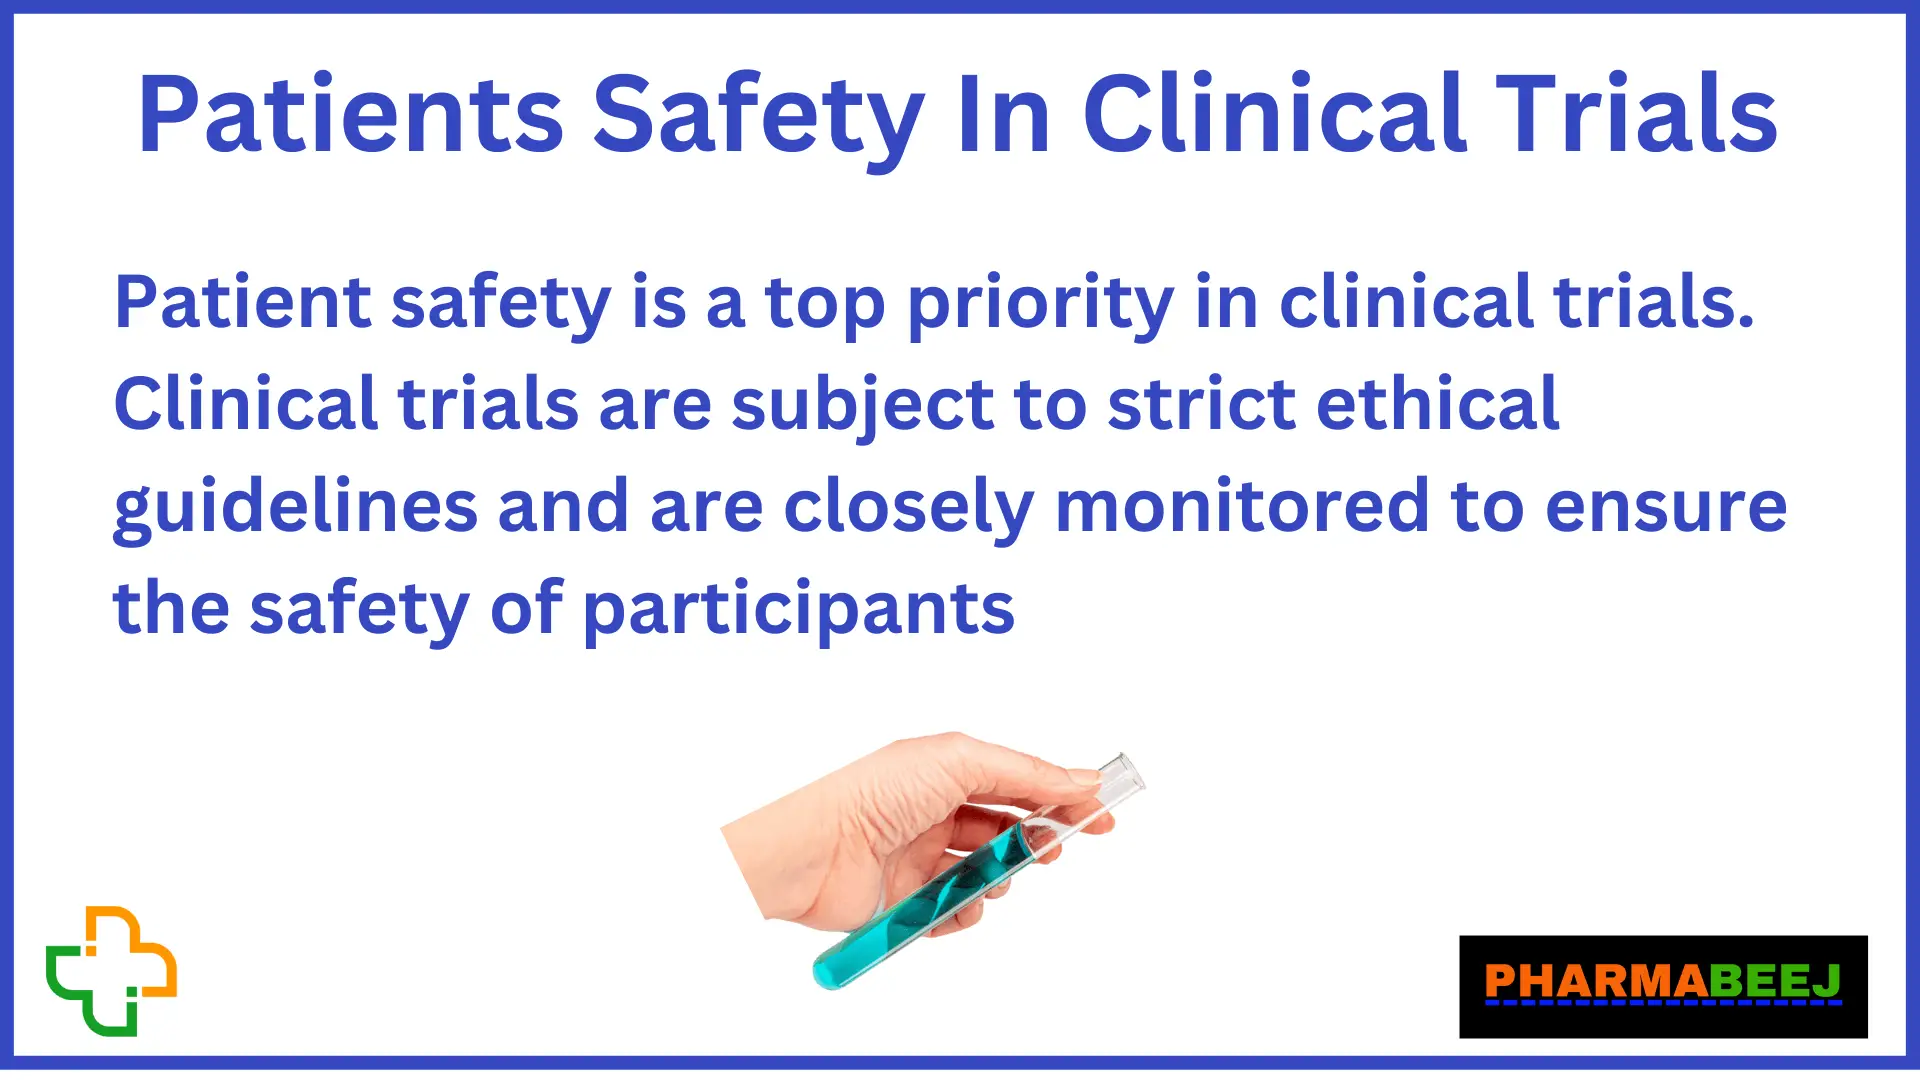 Patient safety in clinical trials